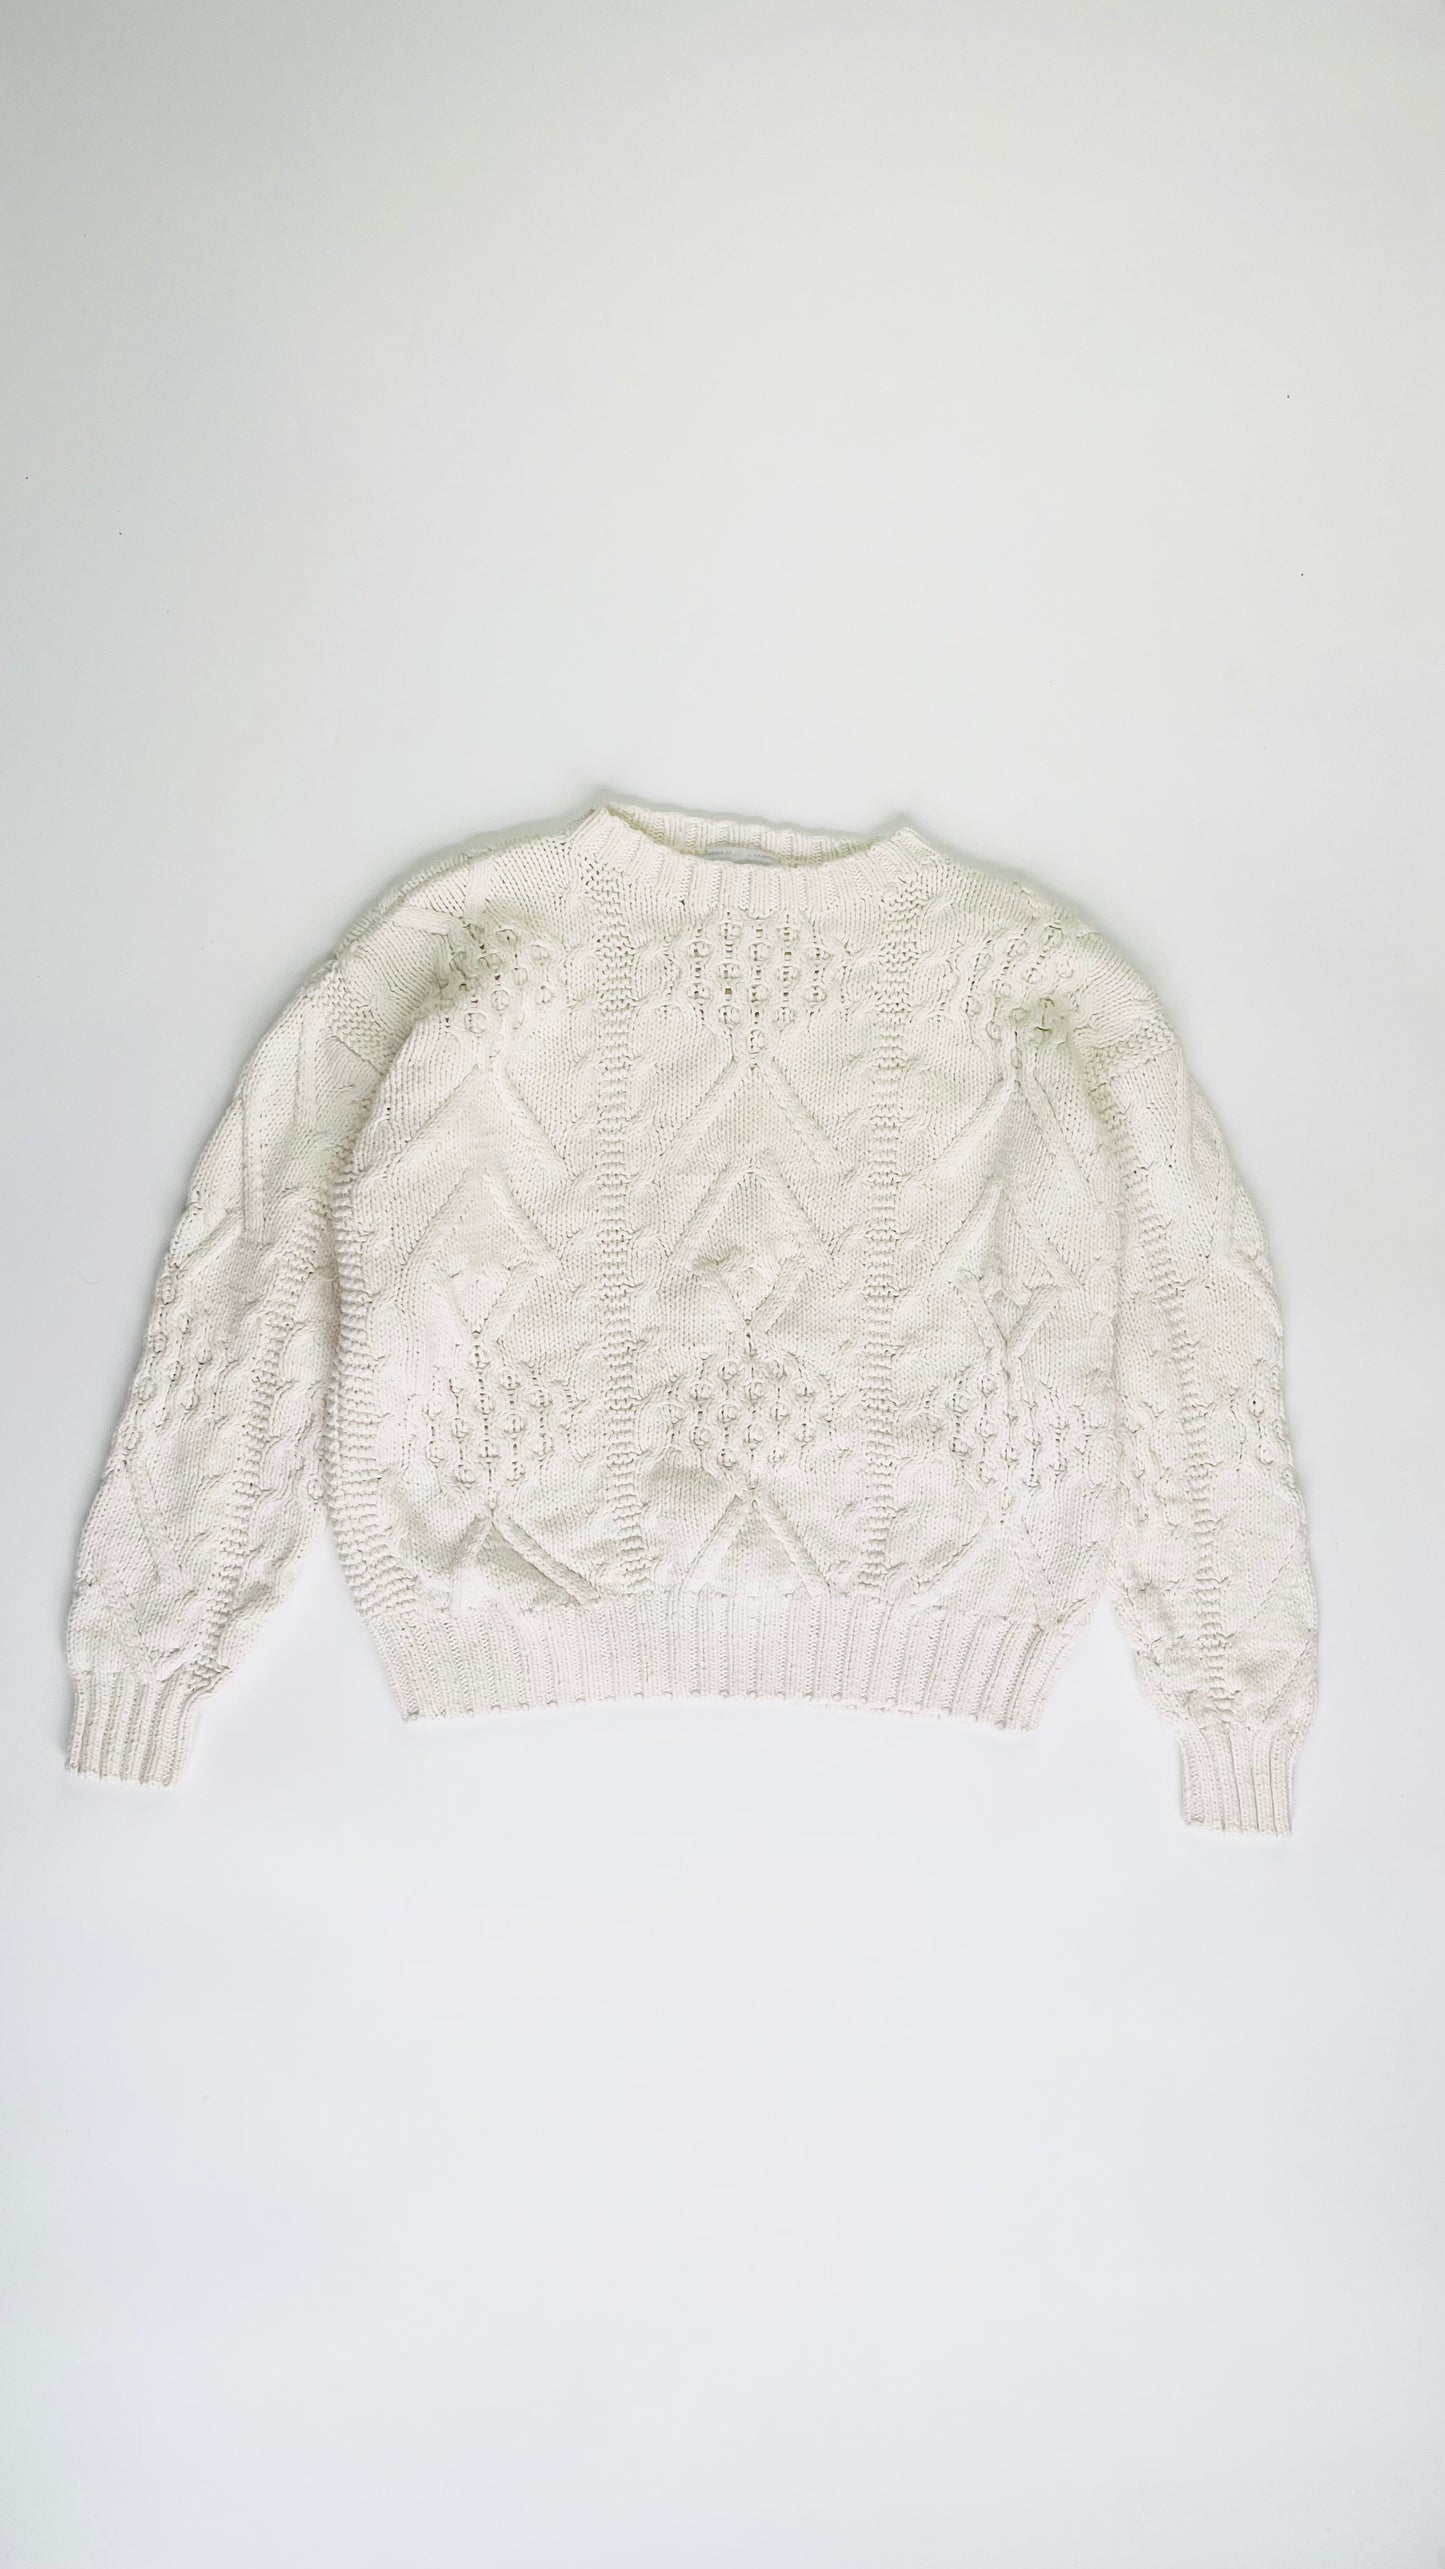 Vintage 90s Nordstrom cream knit sweater- Size M